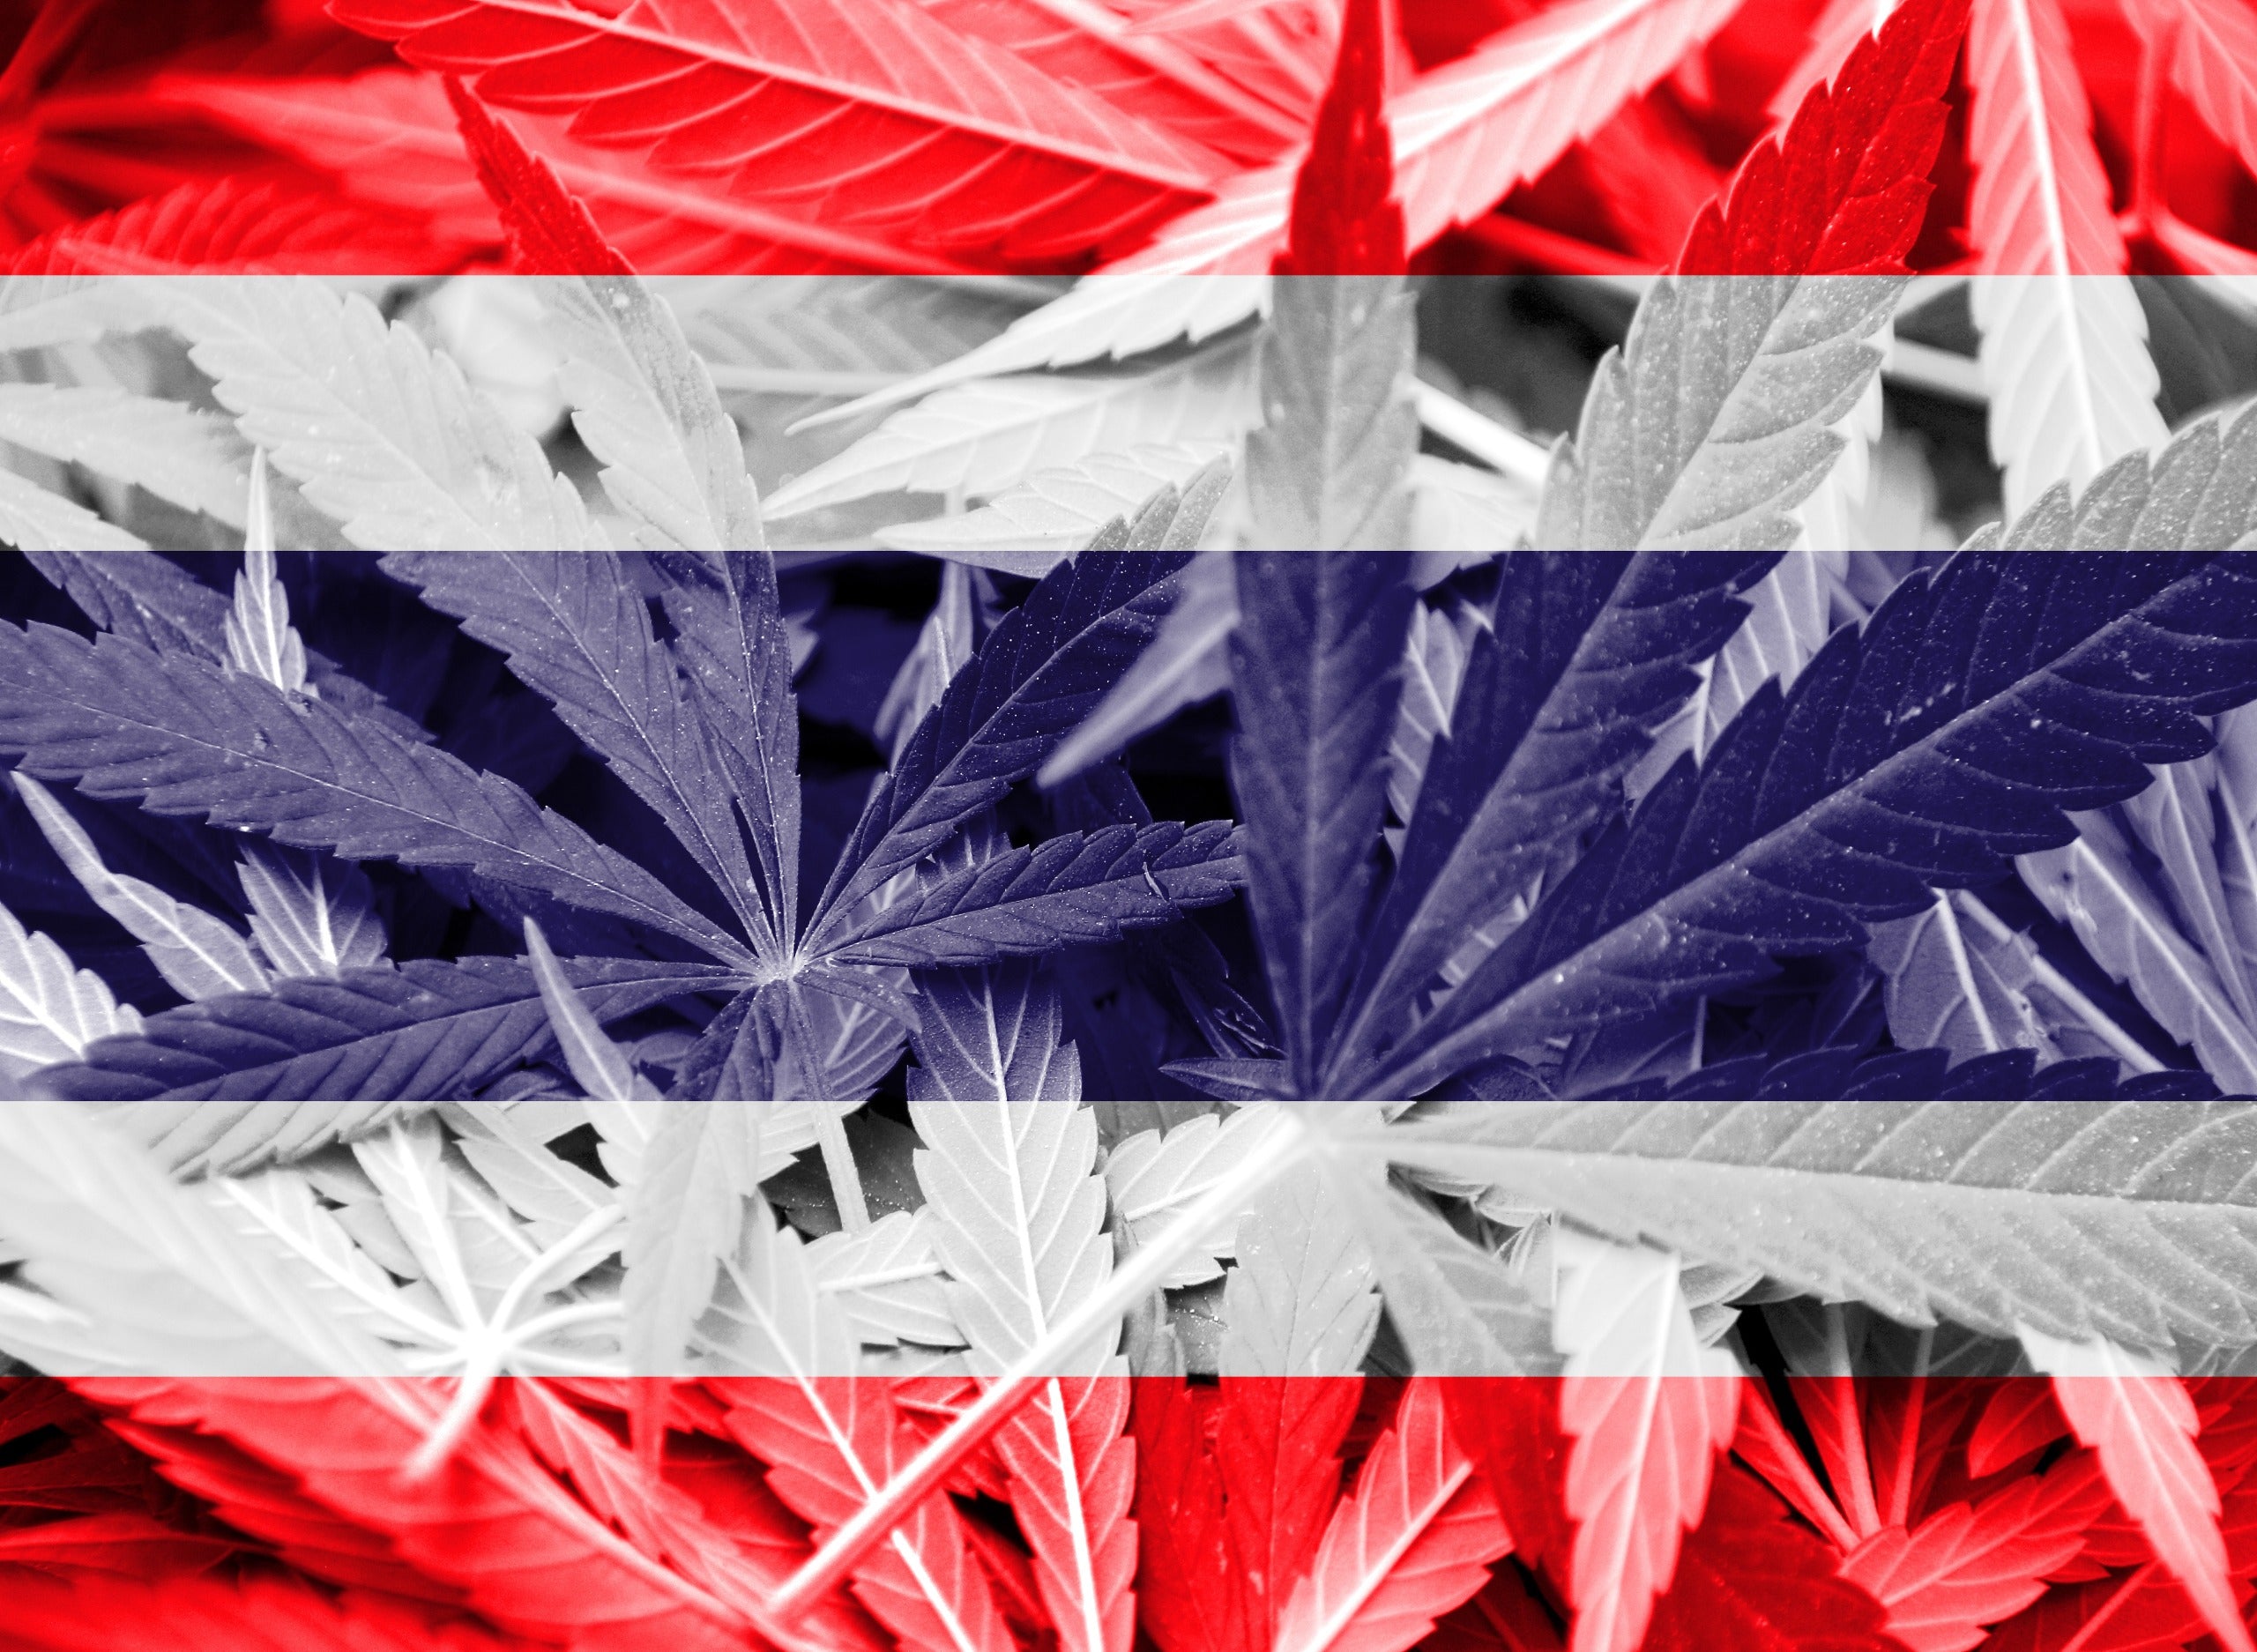 Thailand Set to Limit Cannabis Sales to Medical Use Only